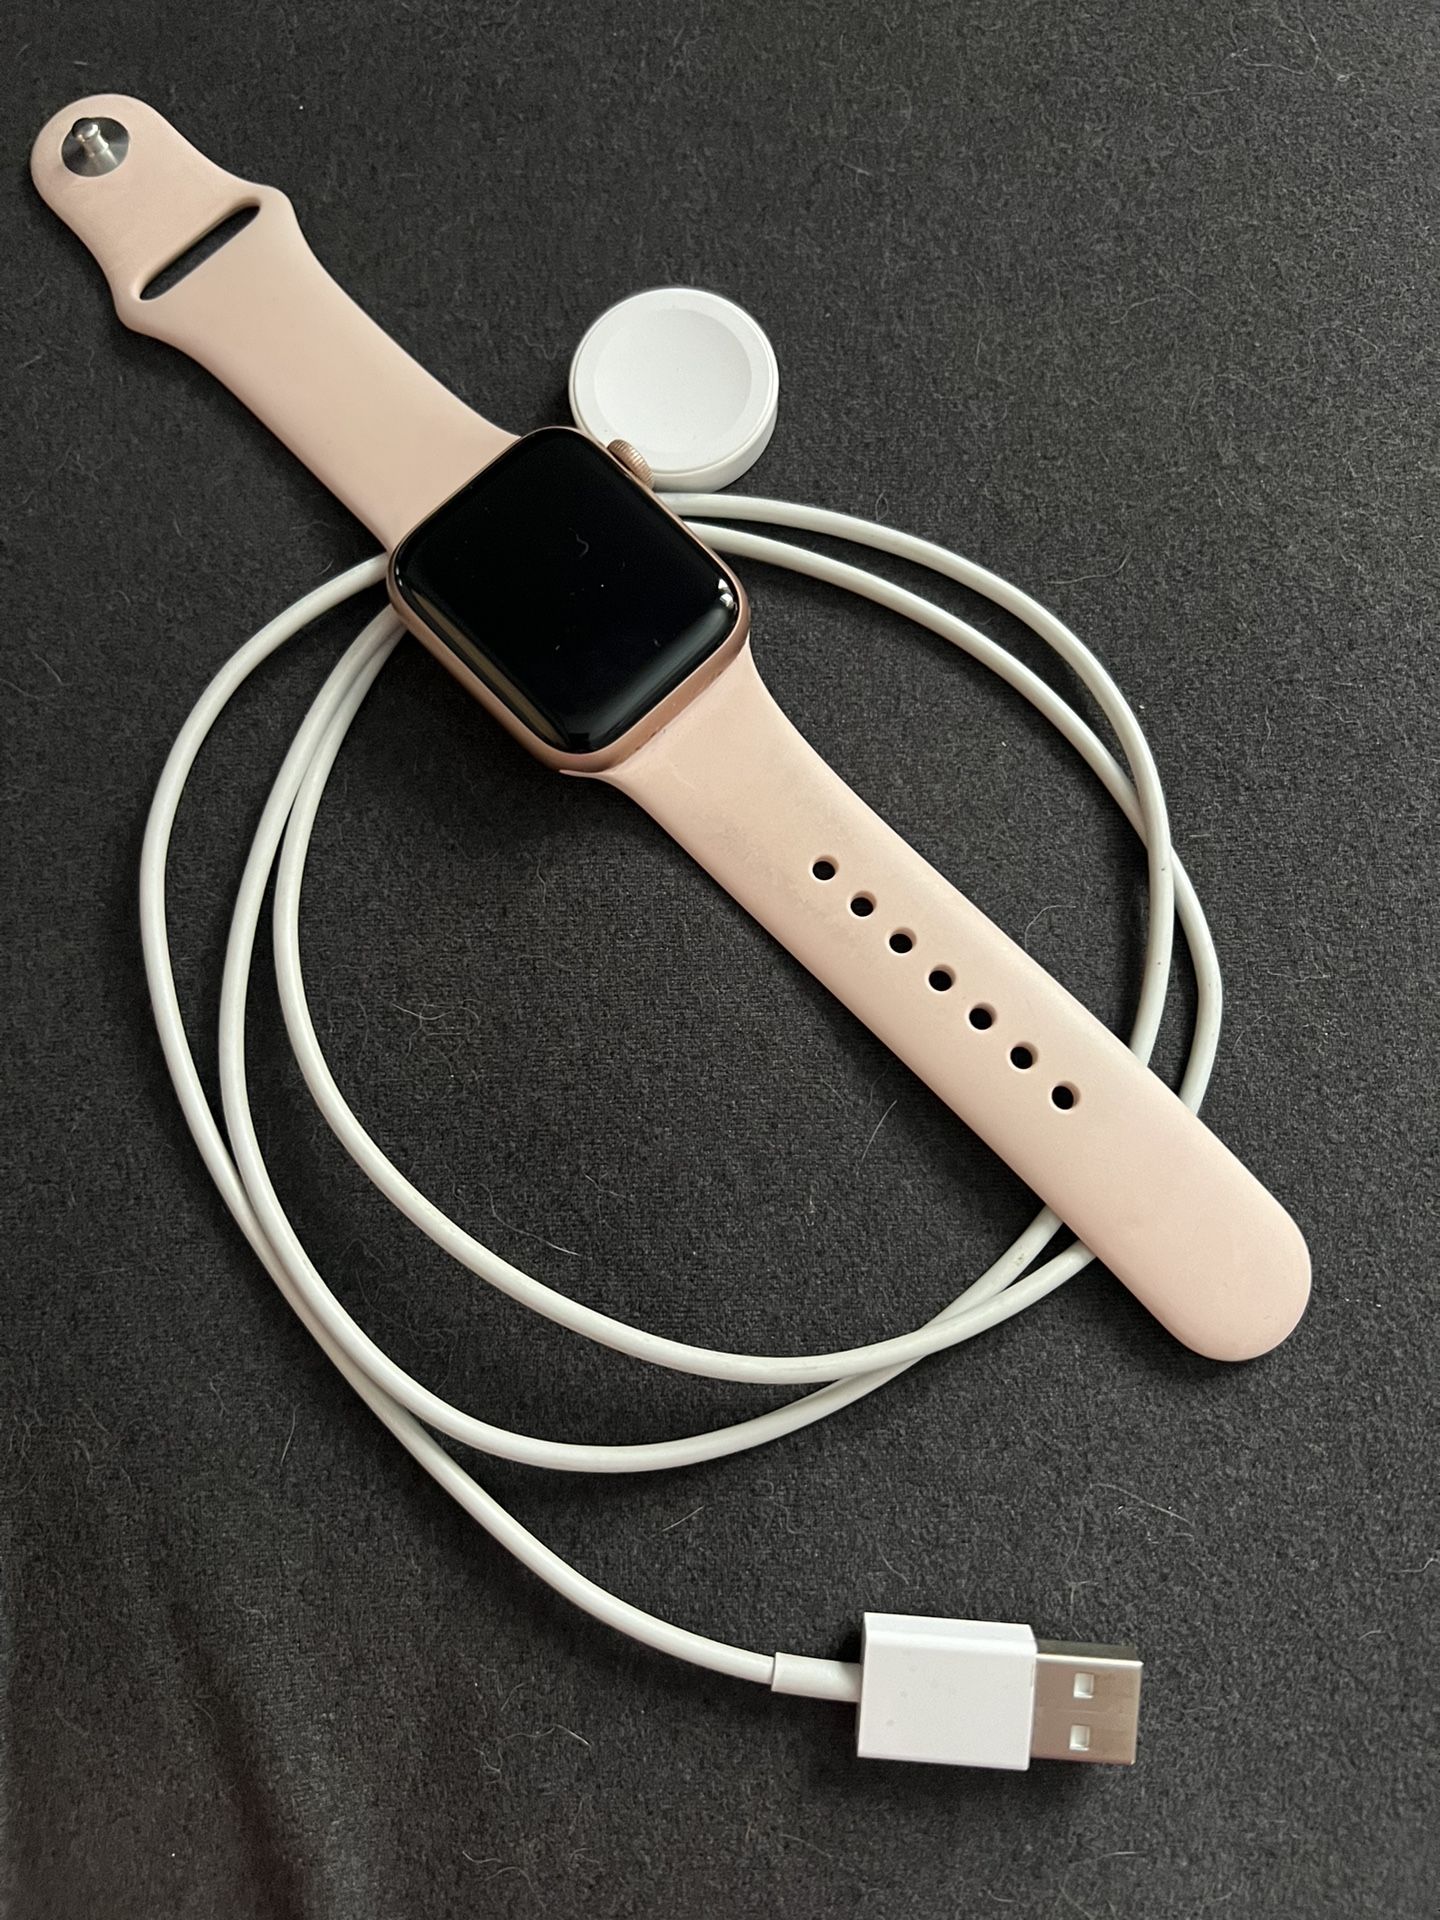 Apple Watch Series 6 40mm Gold Aluminum Case with Pink Sand Sport Band - Regular